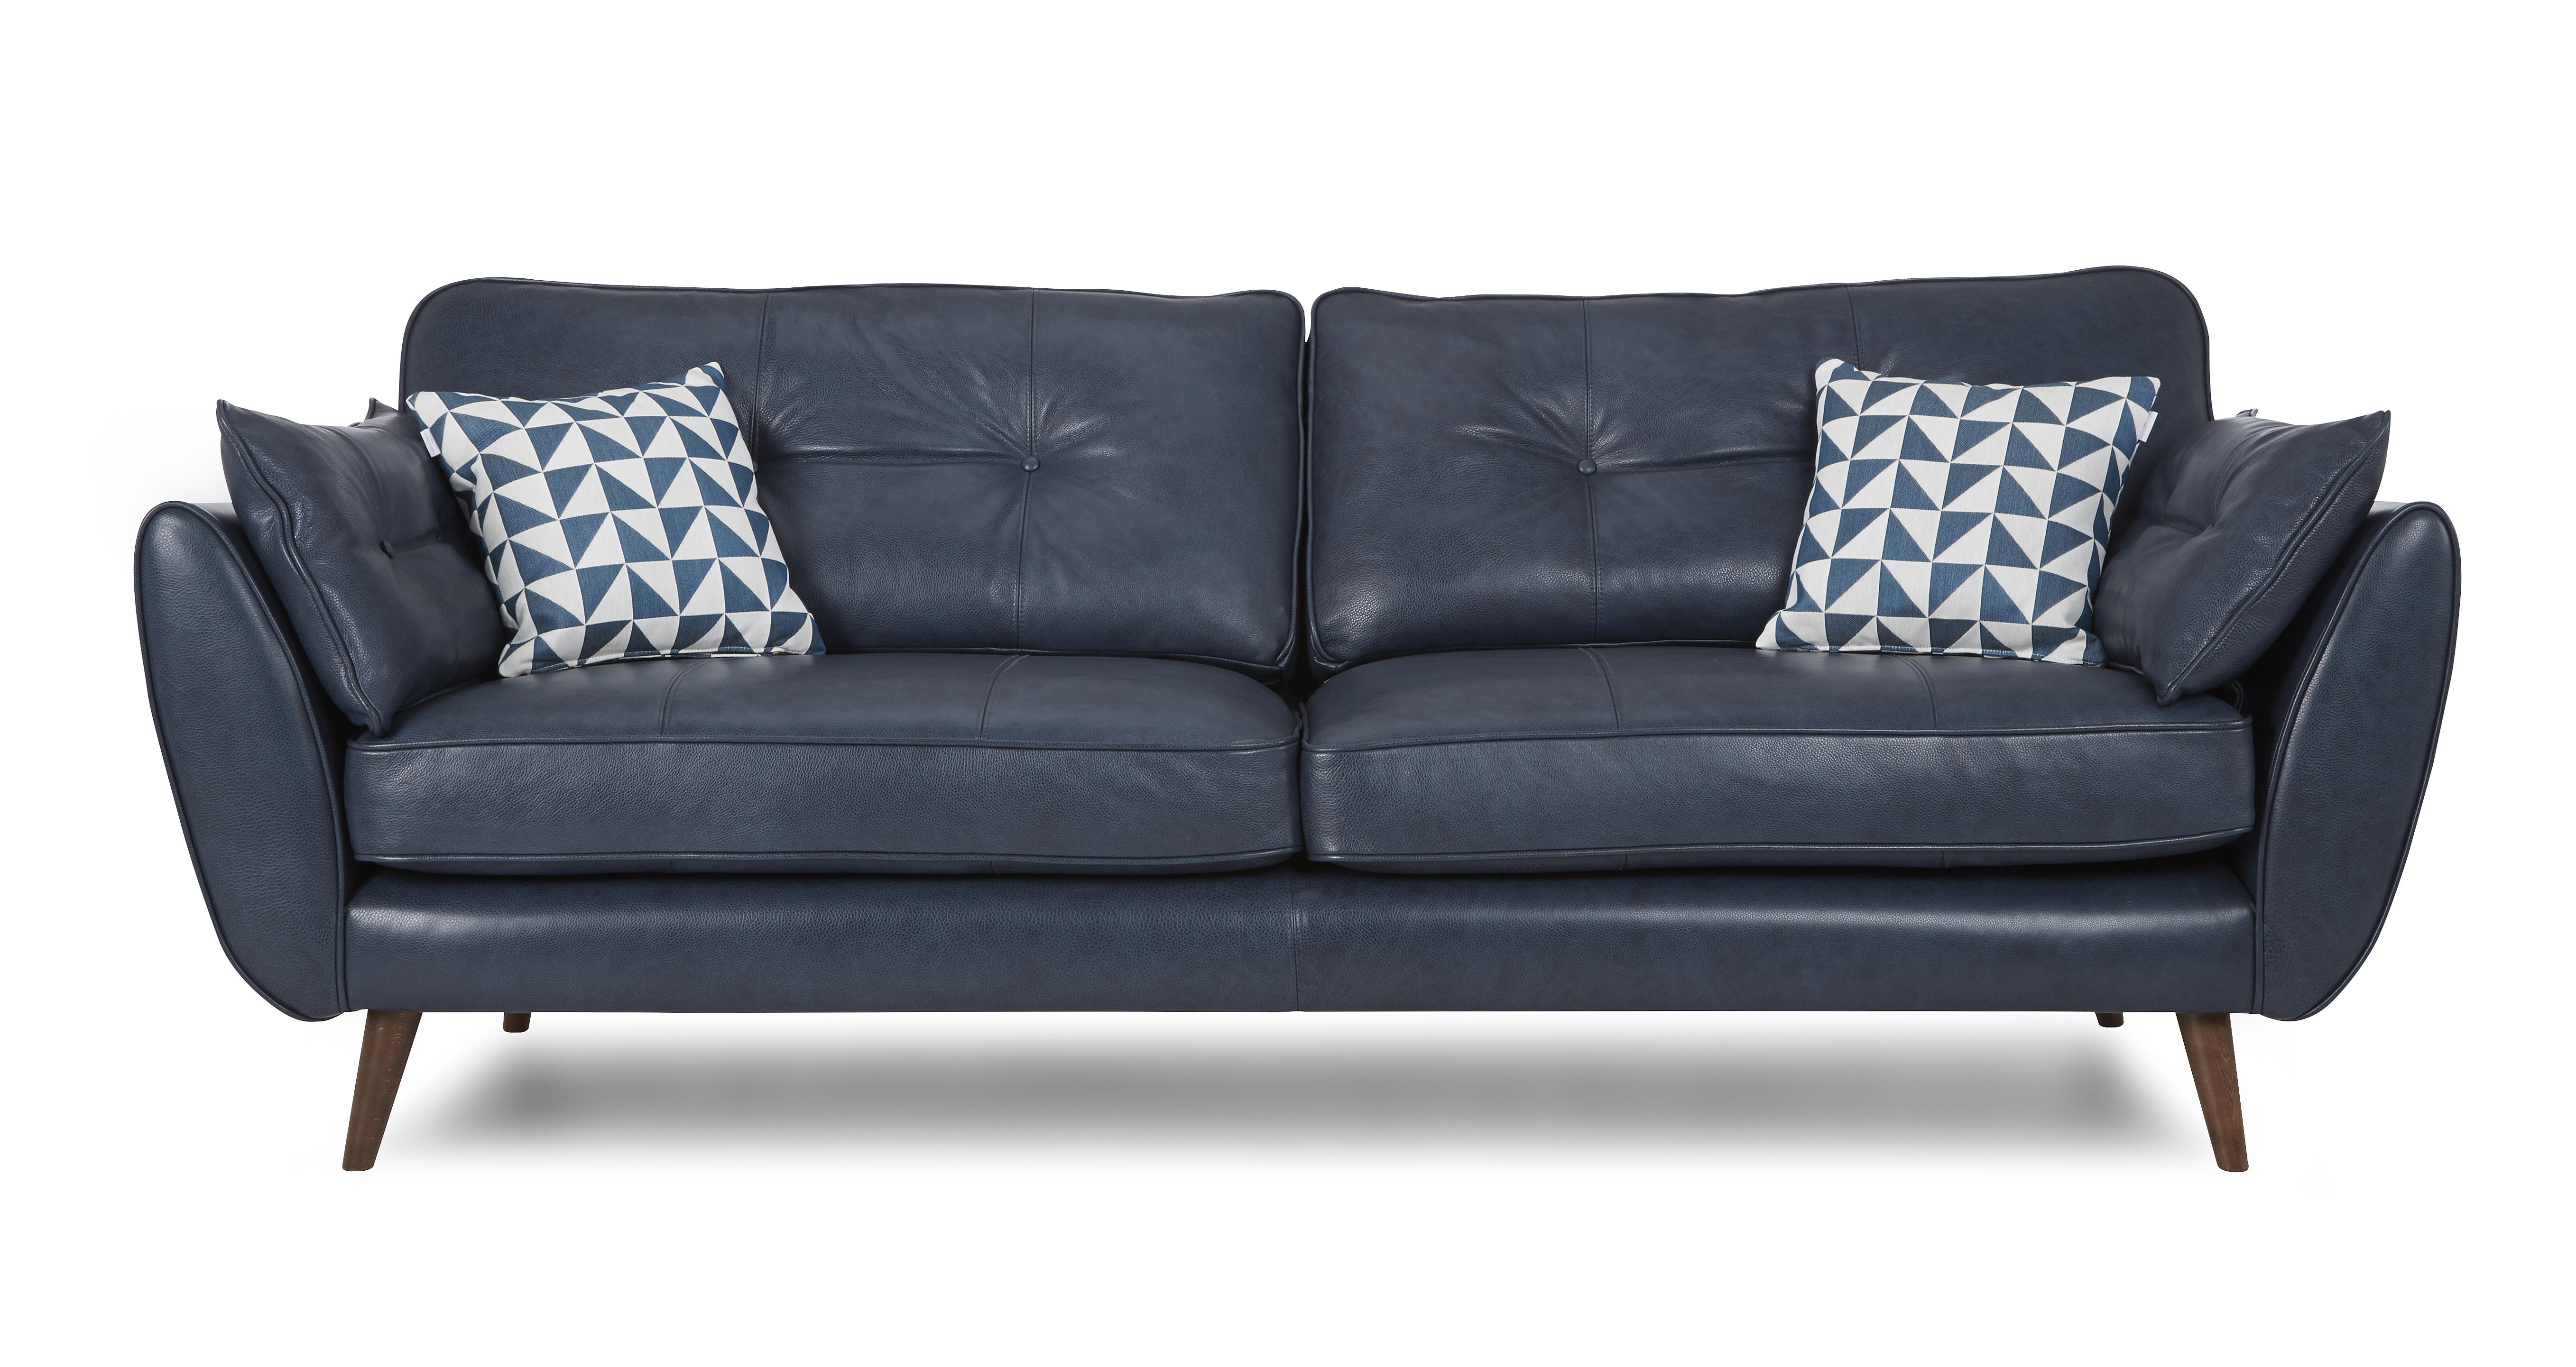 Zinc Leather 4 Seater Sofa, Navy Blue Leather Furniture